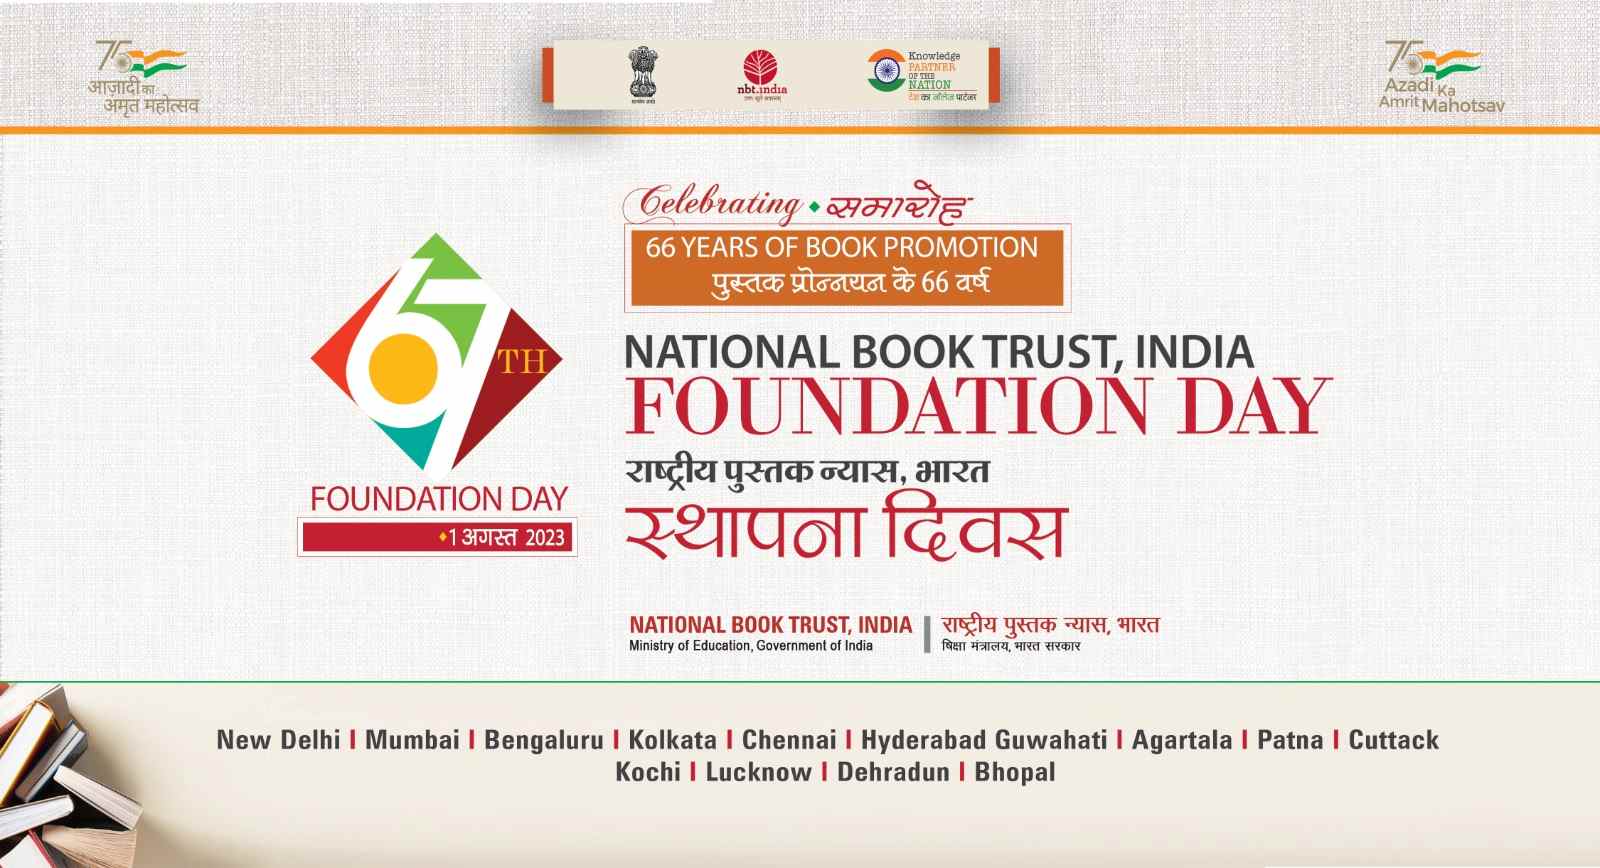 National Book Trust, India Celebrates 66 Years of 